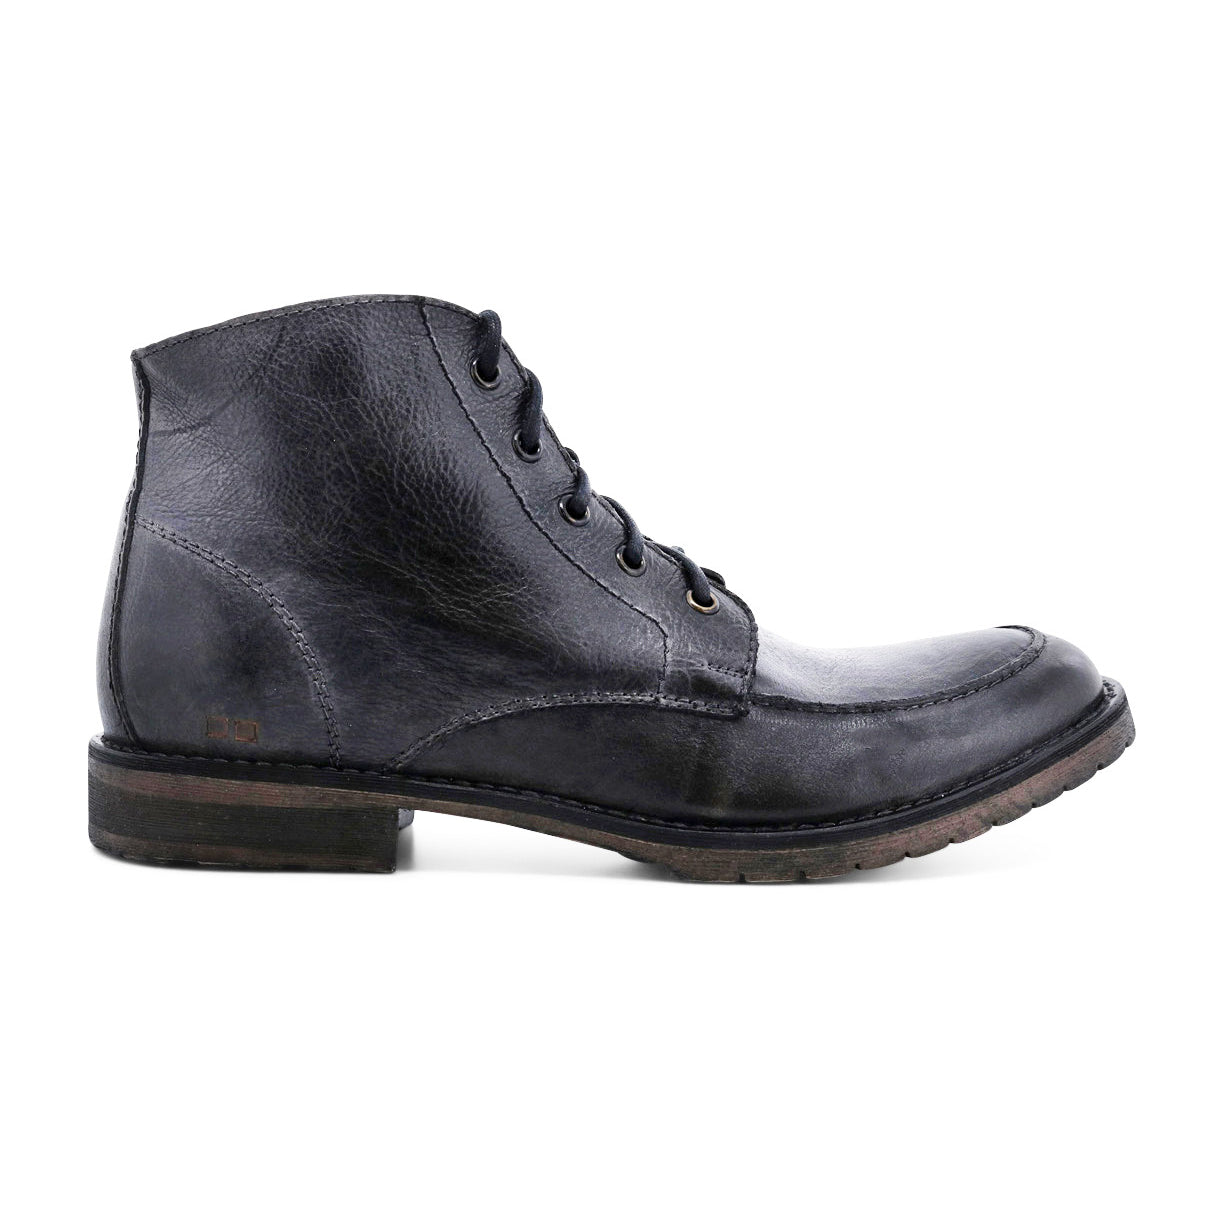 A pair of Bed Stu Curtis II men's black leather boots on a white background.